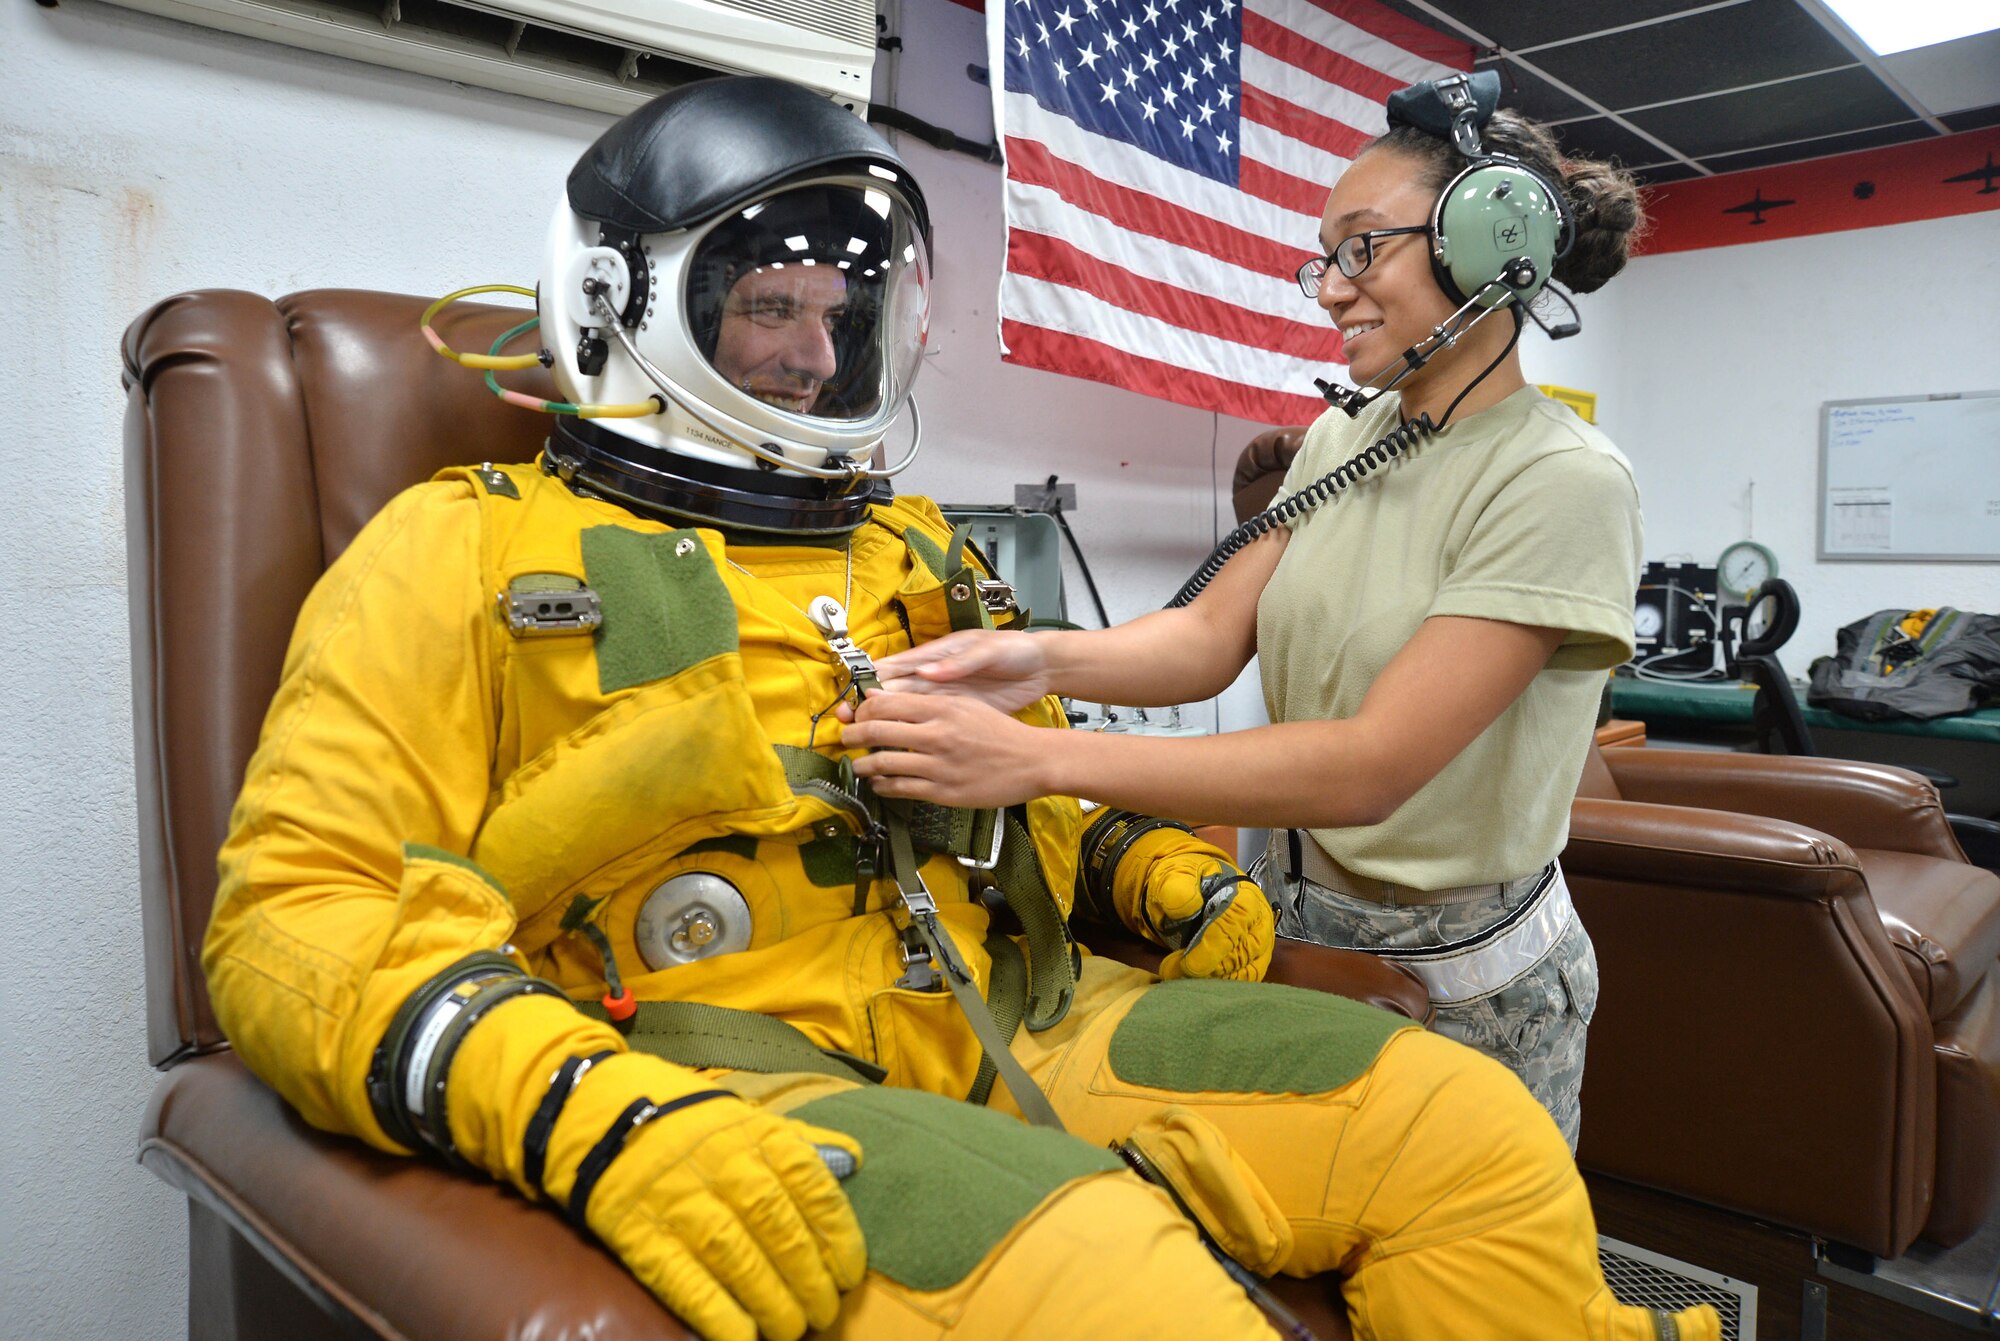 Airman First Class Christian, Expeditionary Reconnaissance Squadron physiology support technician, right, shares a laugh with Lt. Col. David, ERS U-2 pilot, during the pressurizing process at an undisclosed location in Southwest Asia Aug. 7, 2015. U-2 pilots are required to wear the specialized suit due to the high altitudes they typically fly at. The physiological support detachment team is responsible for maintaining the suit, ensuring it functions properly and assisting pilots with donning the gear. (U.S. Air Force photo/Tech. Sgt. Jeff Andrejcik)